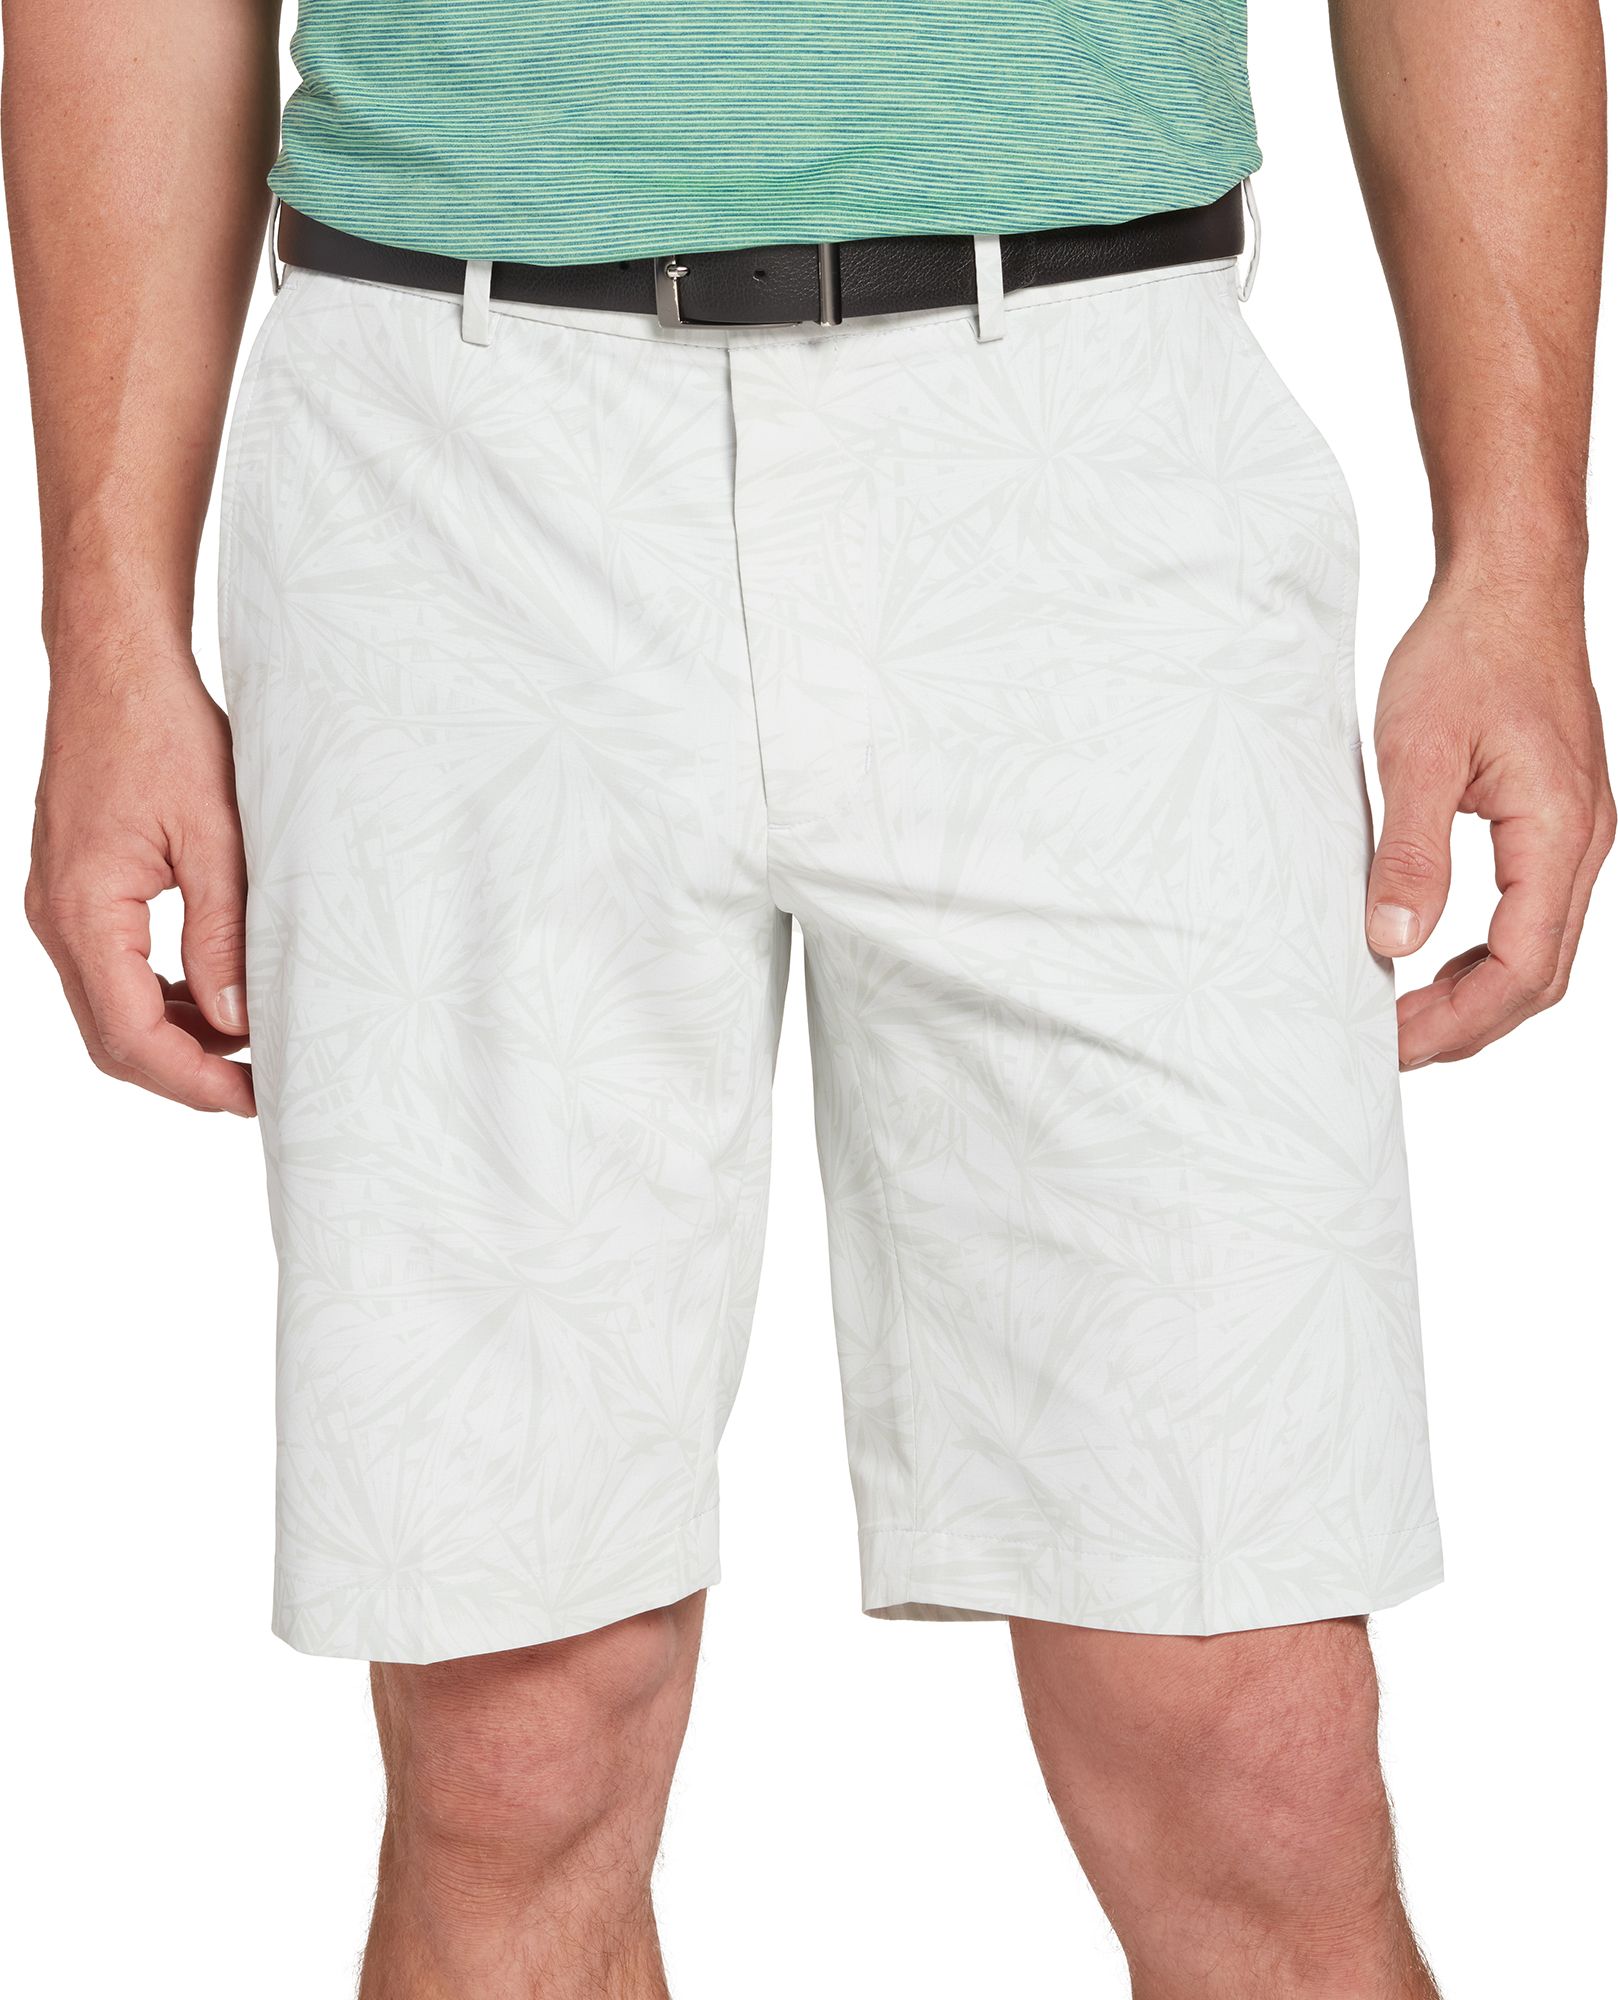 Lejos desempleo Usual Clearance Golf Apparel | DICK'S Sporting Goods